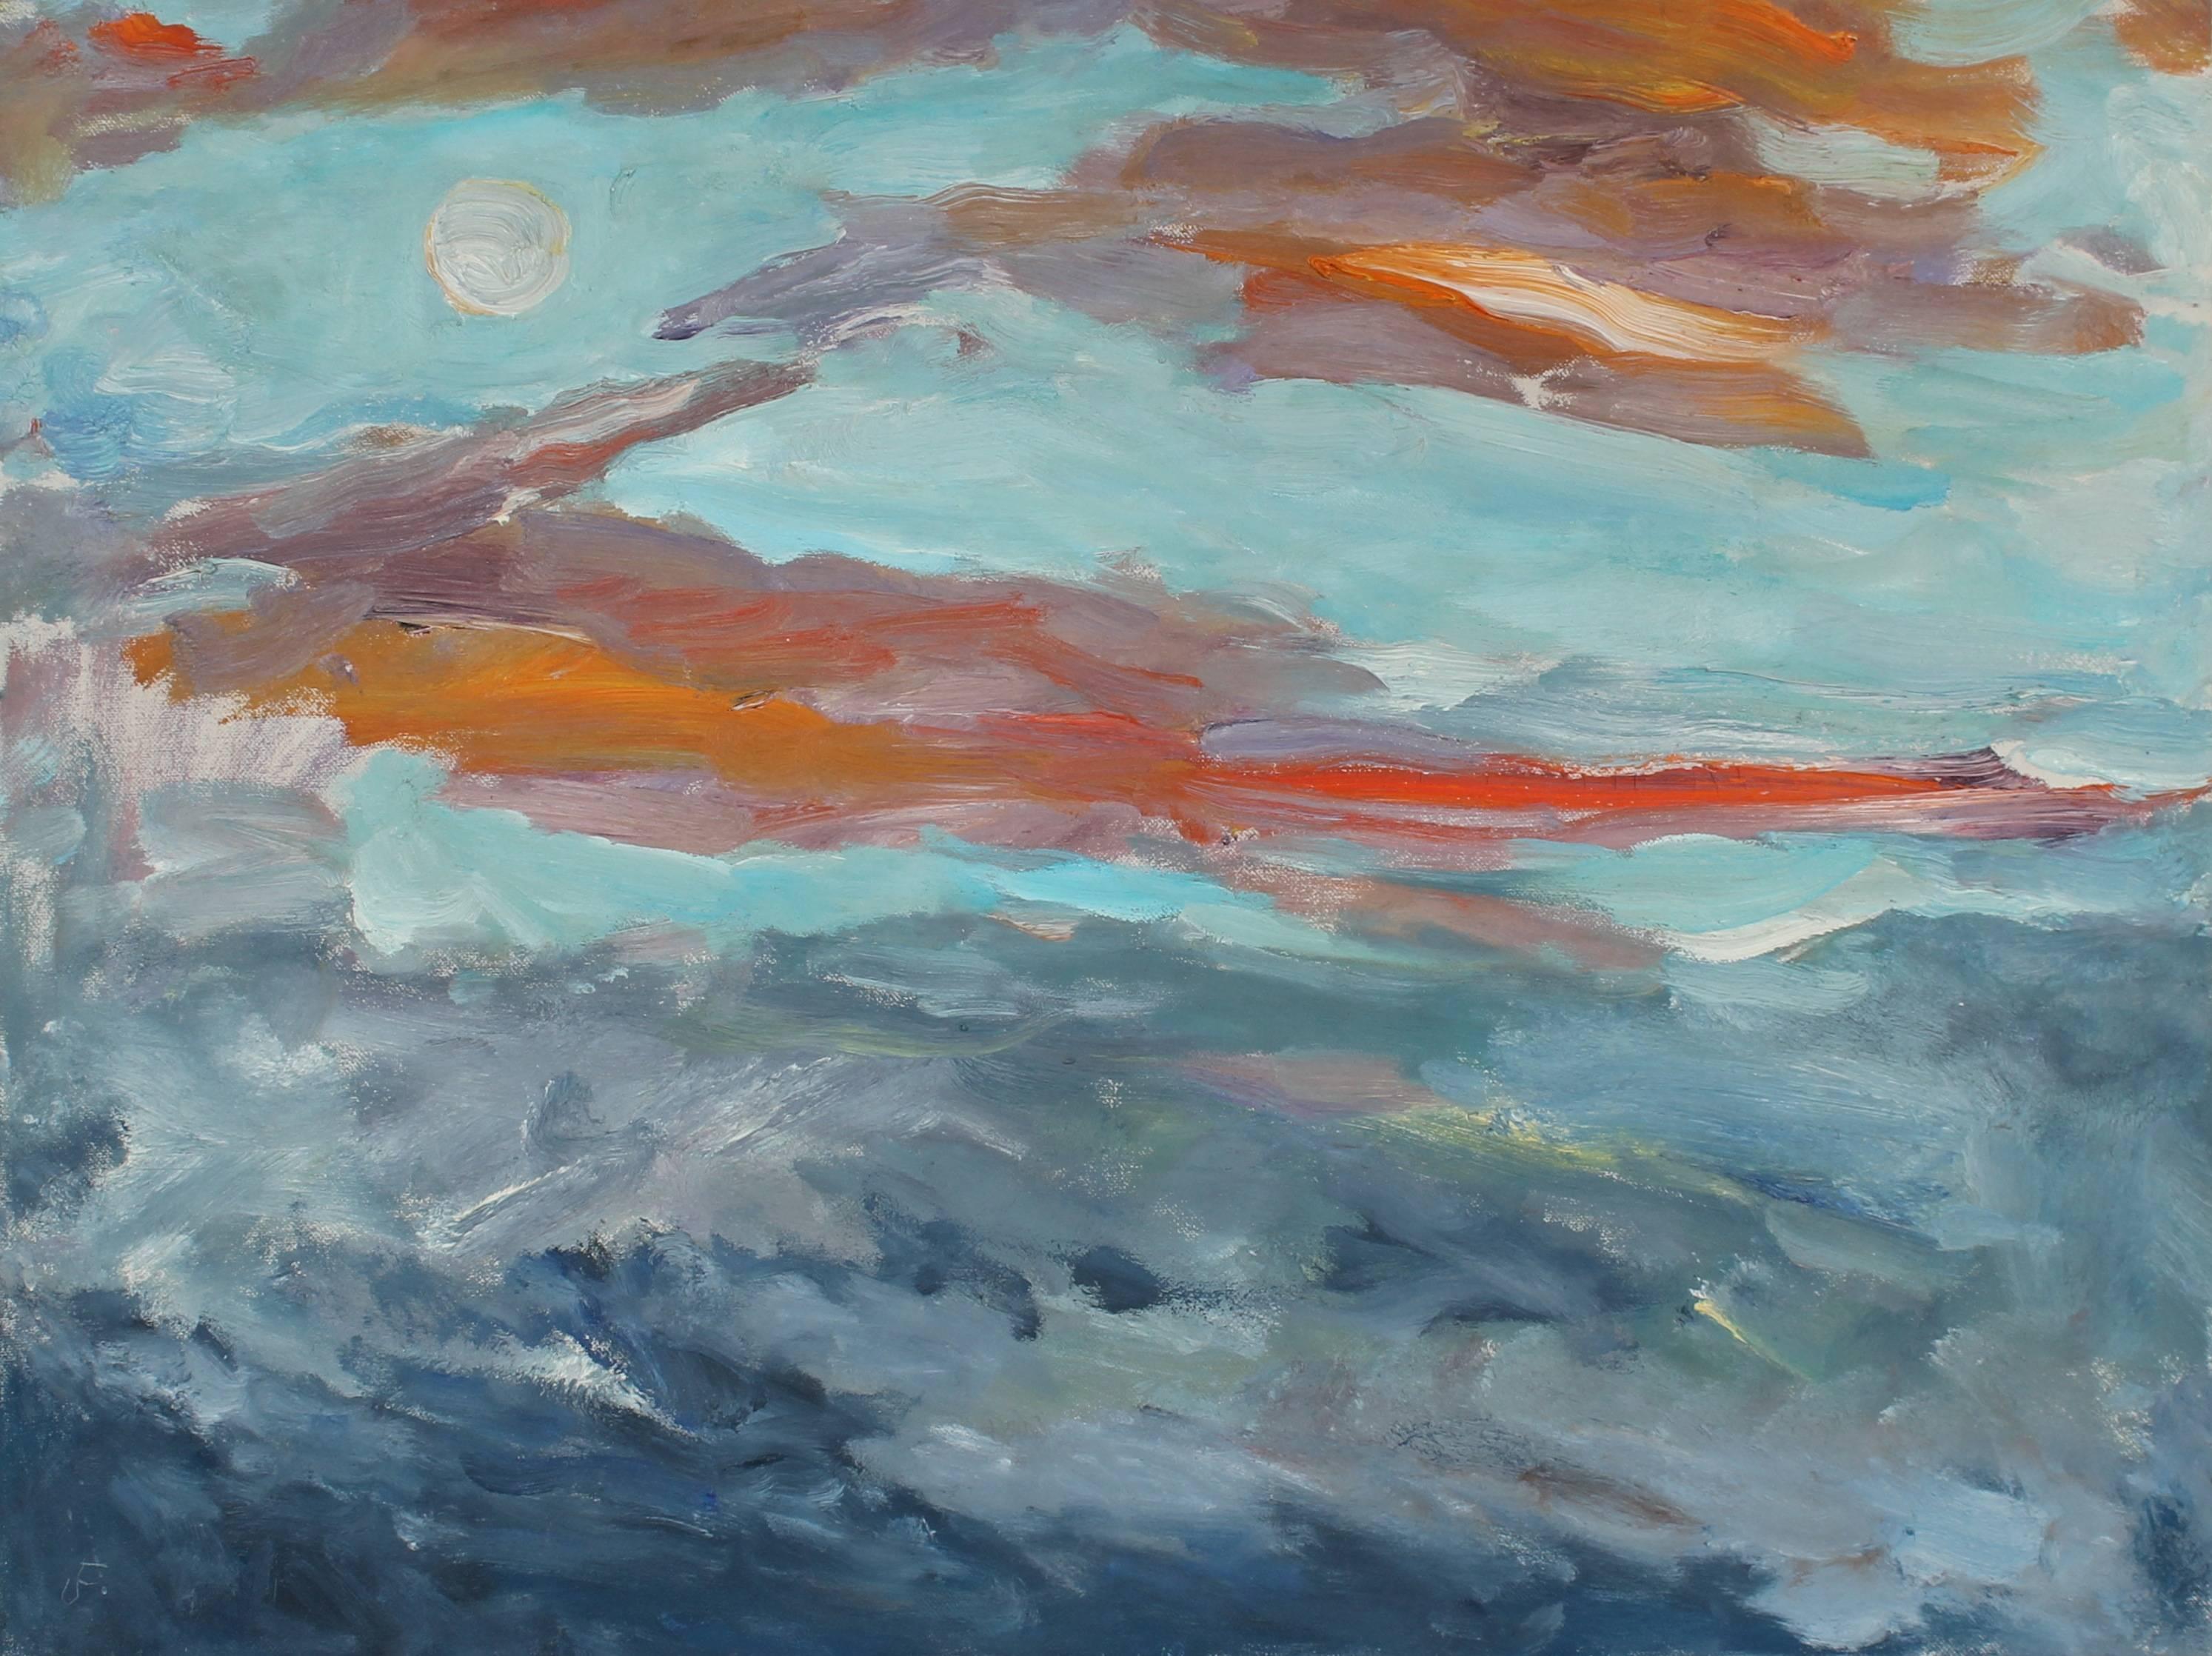 Jack Freeman Landscape Painting - "Full Moon Rise in a Sunset Sky" Landscape with Clouds in Oil, 1989